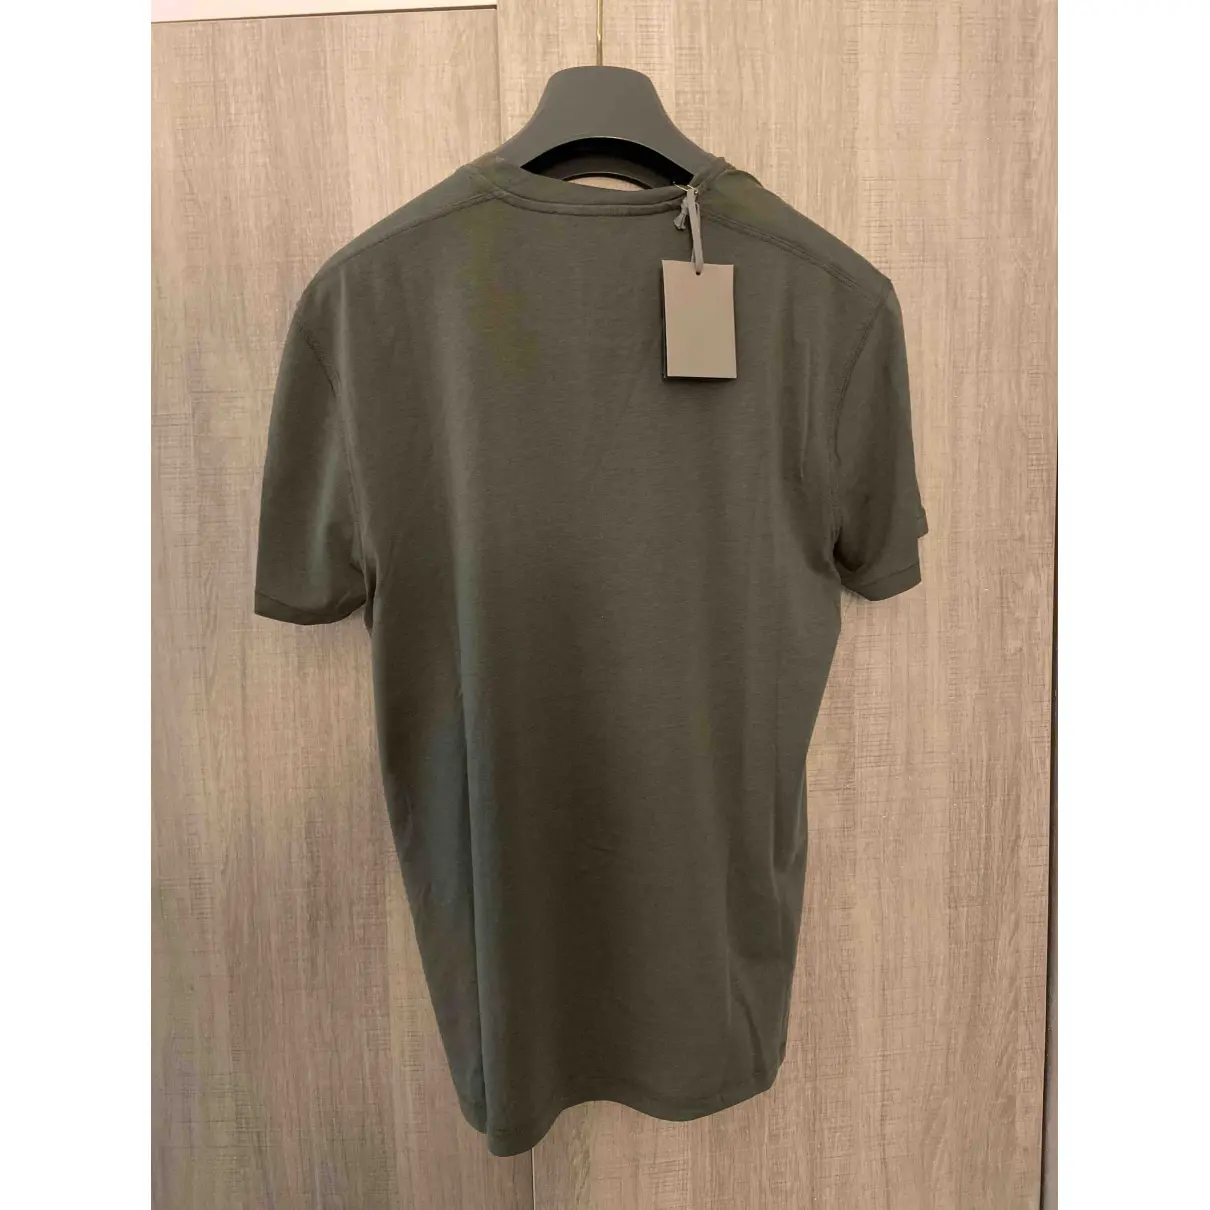 Buy Tom Ford Green Cotton T-shirt online